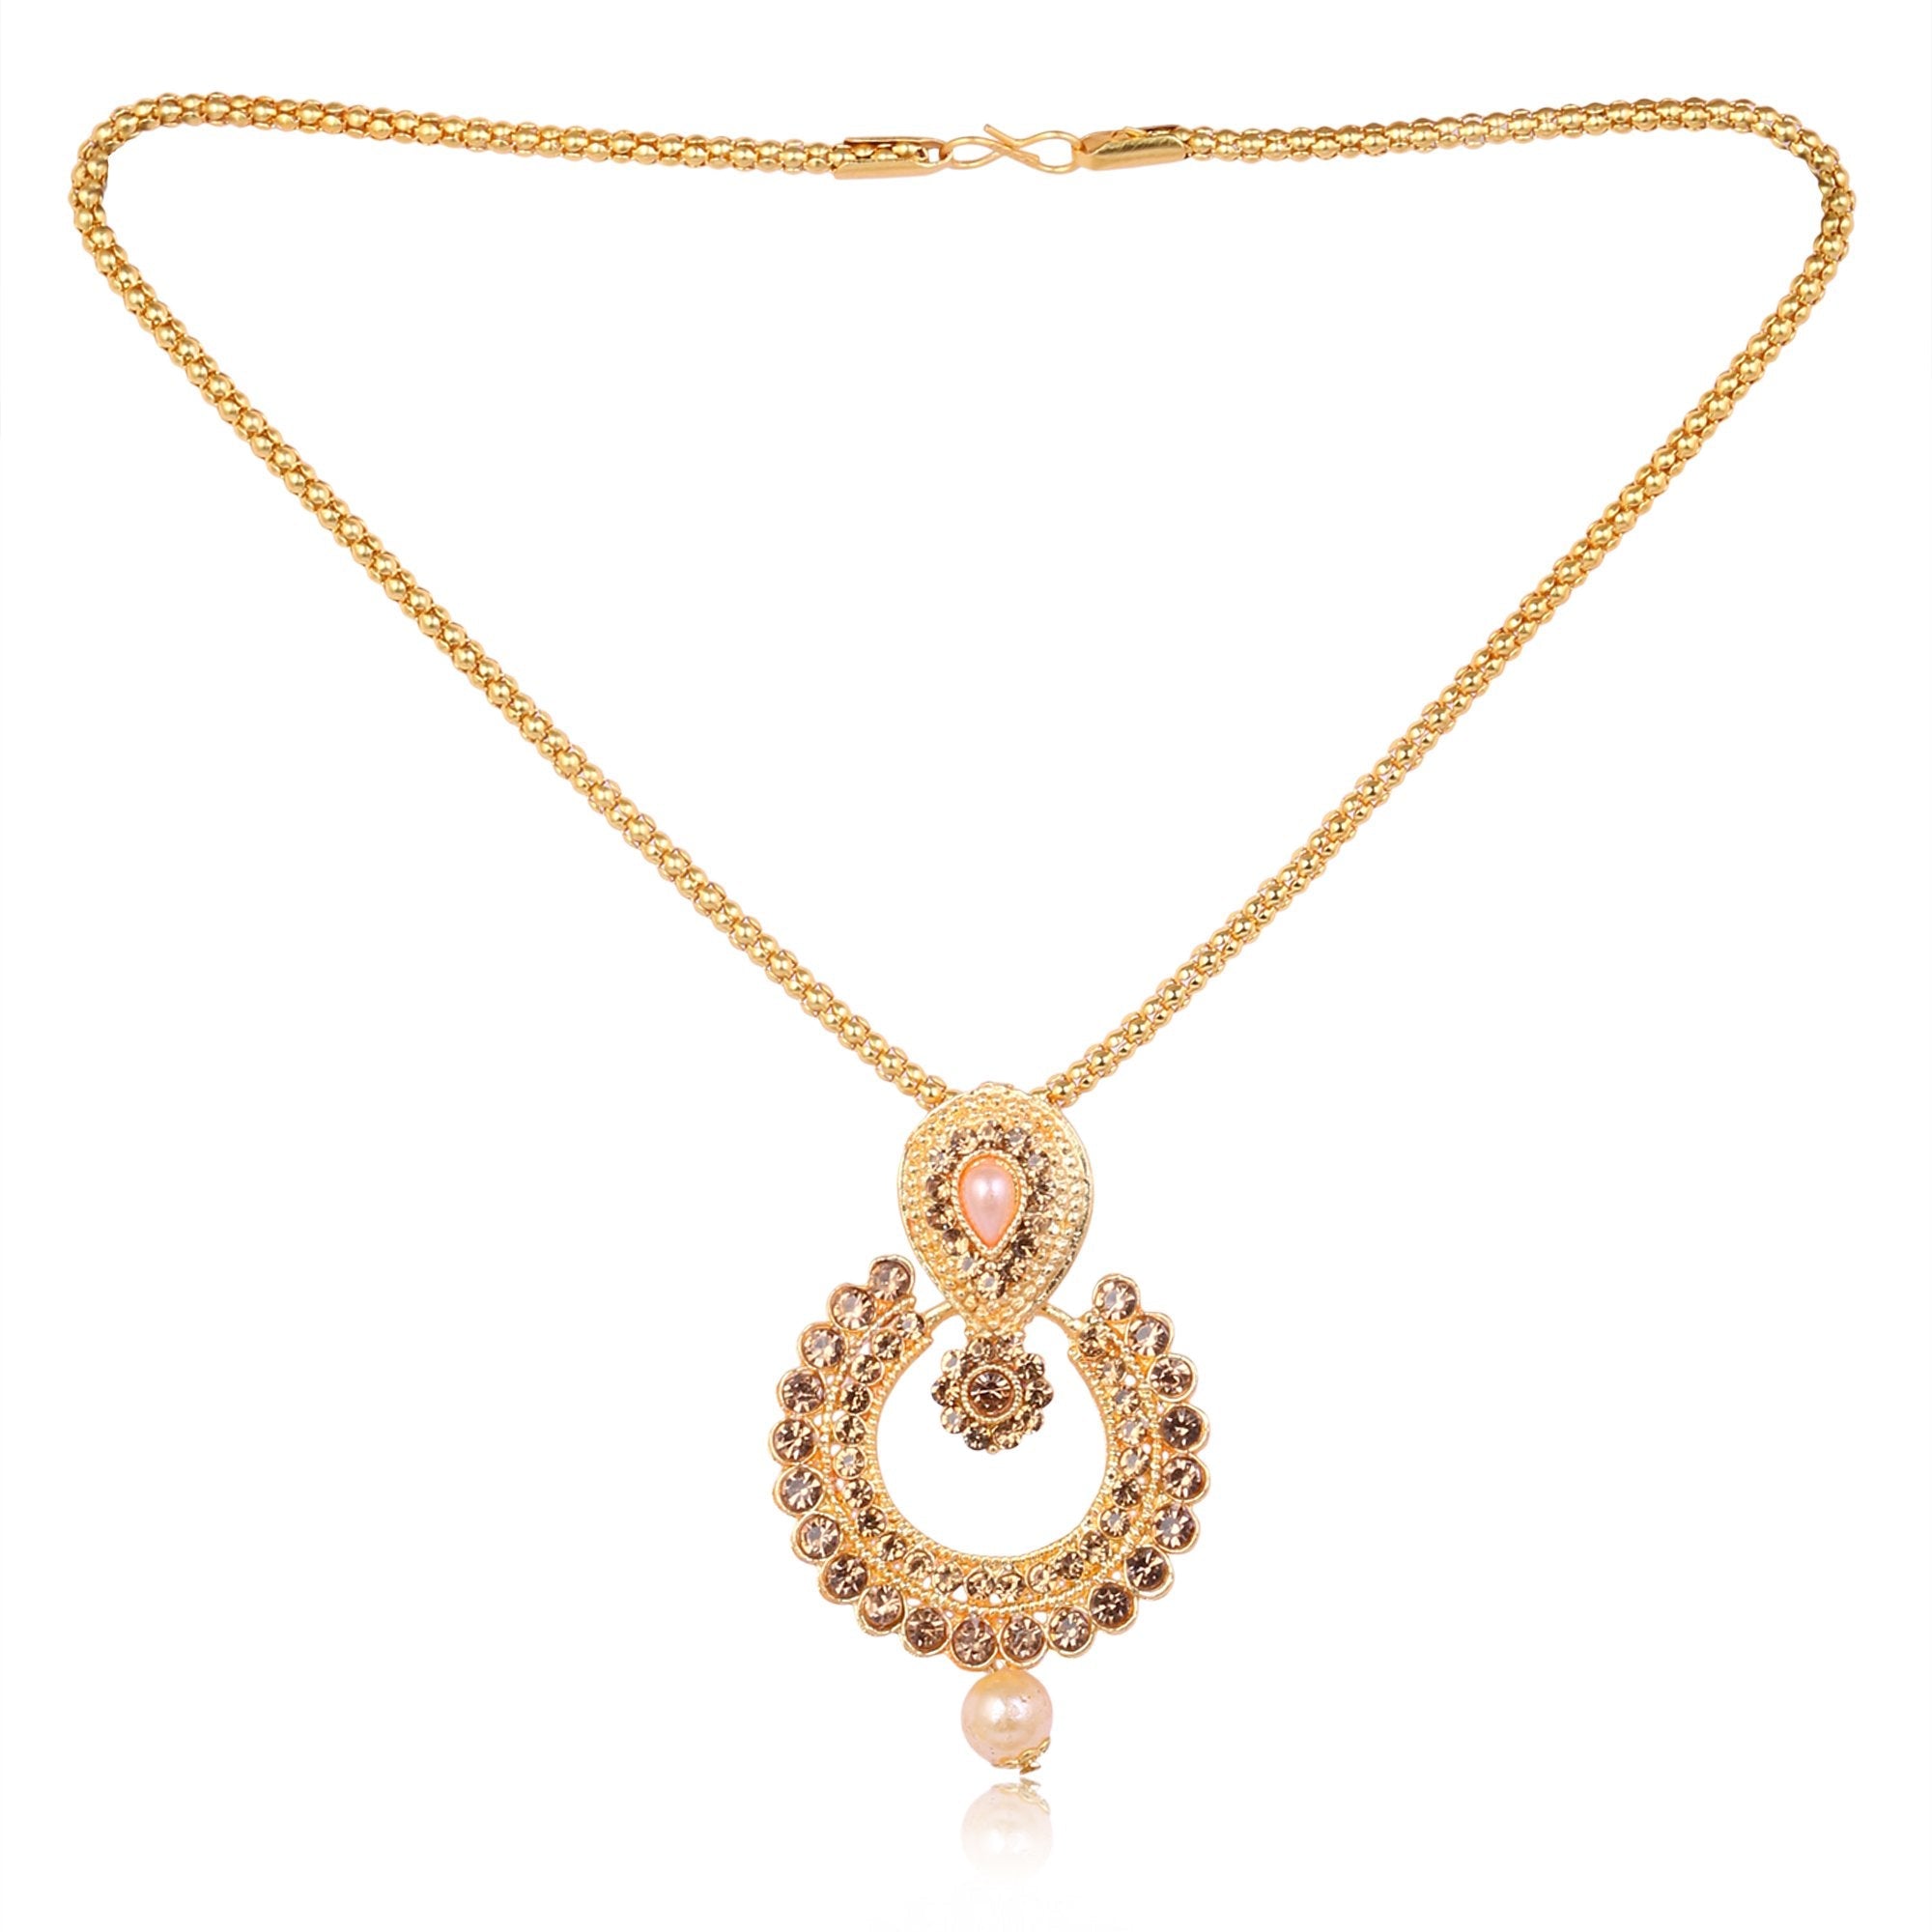 Women's Stone Studded Chain Pendent And Earrings With Pearl  - Tehzeeb